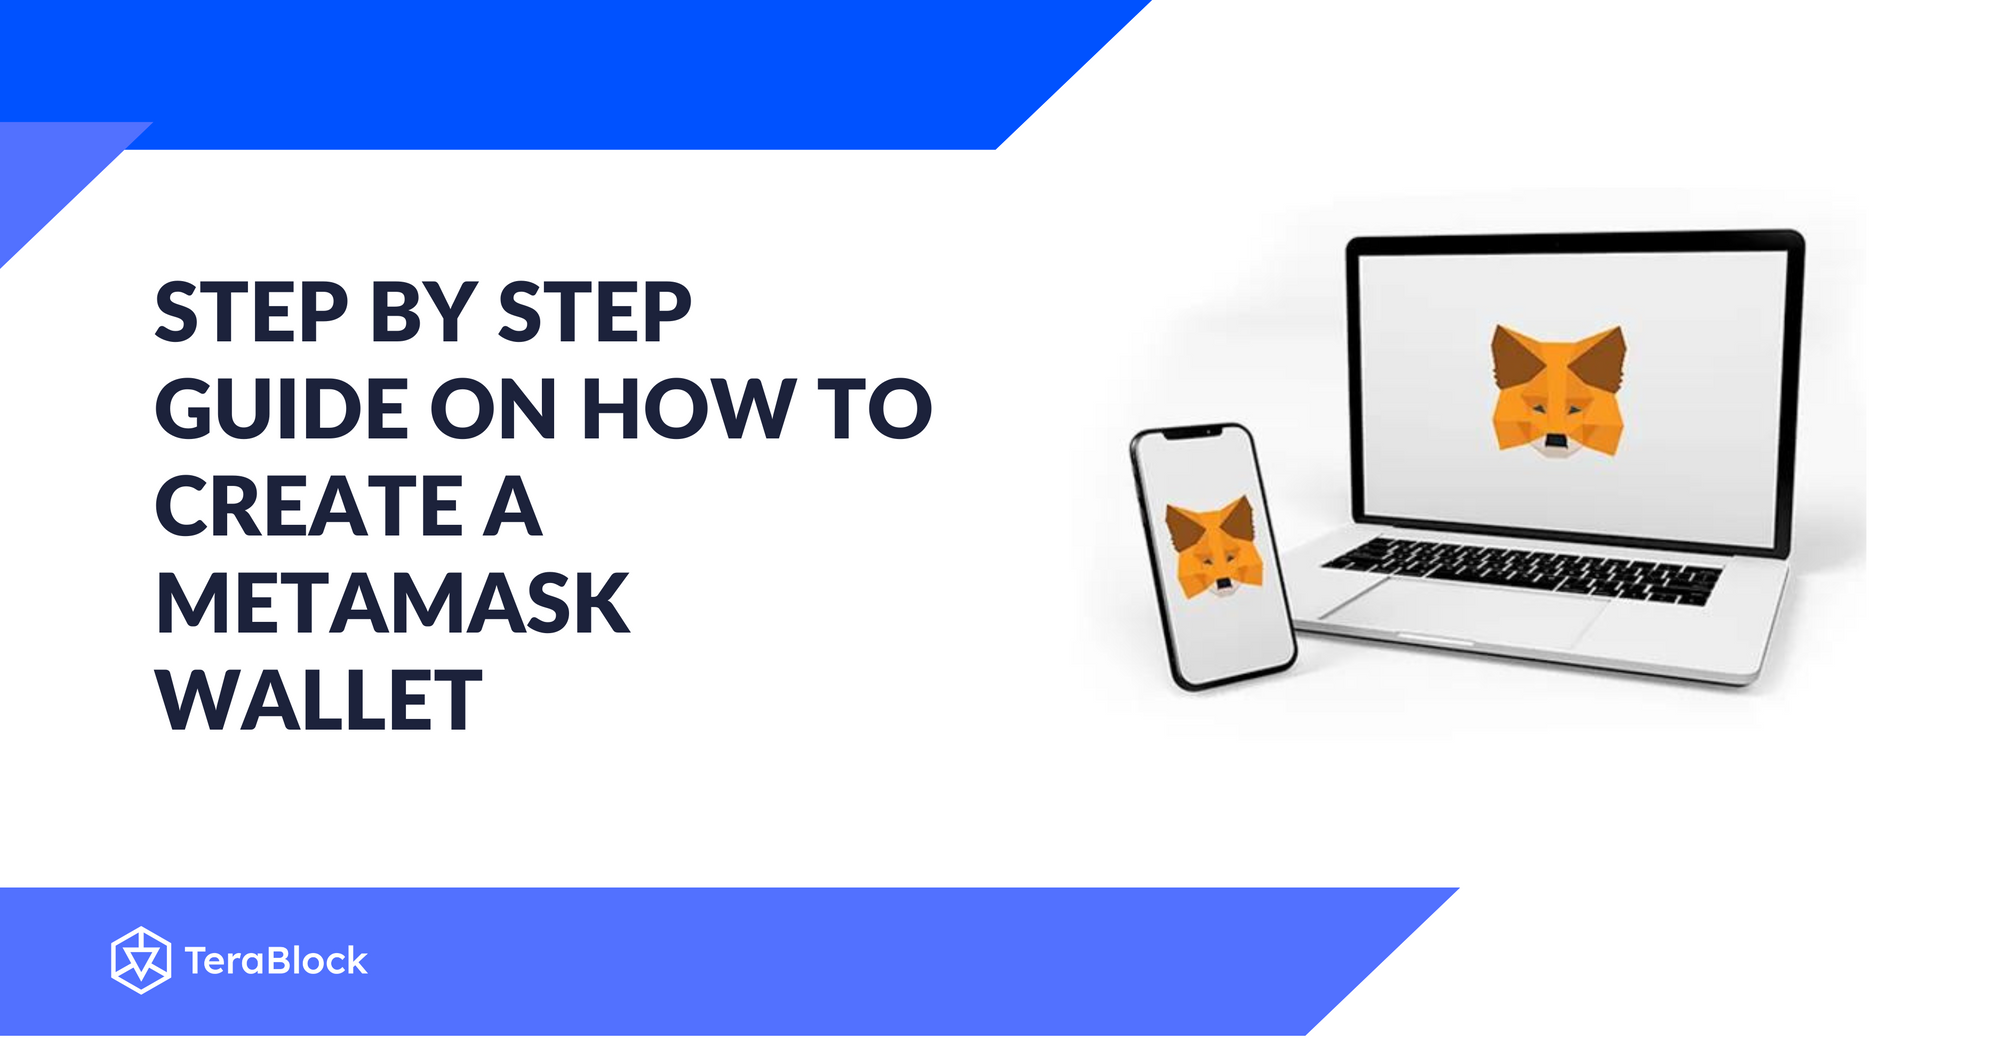 Step by step guide on how to create a MetaMask wallet